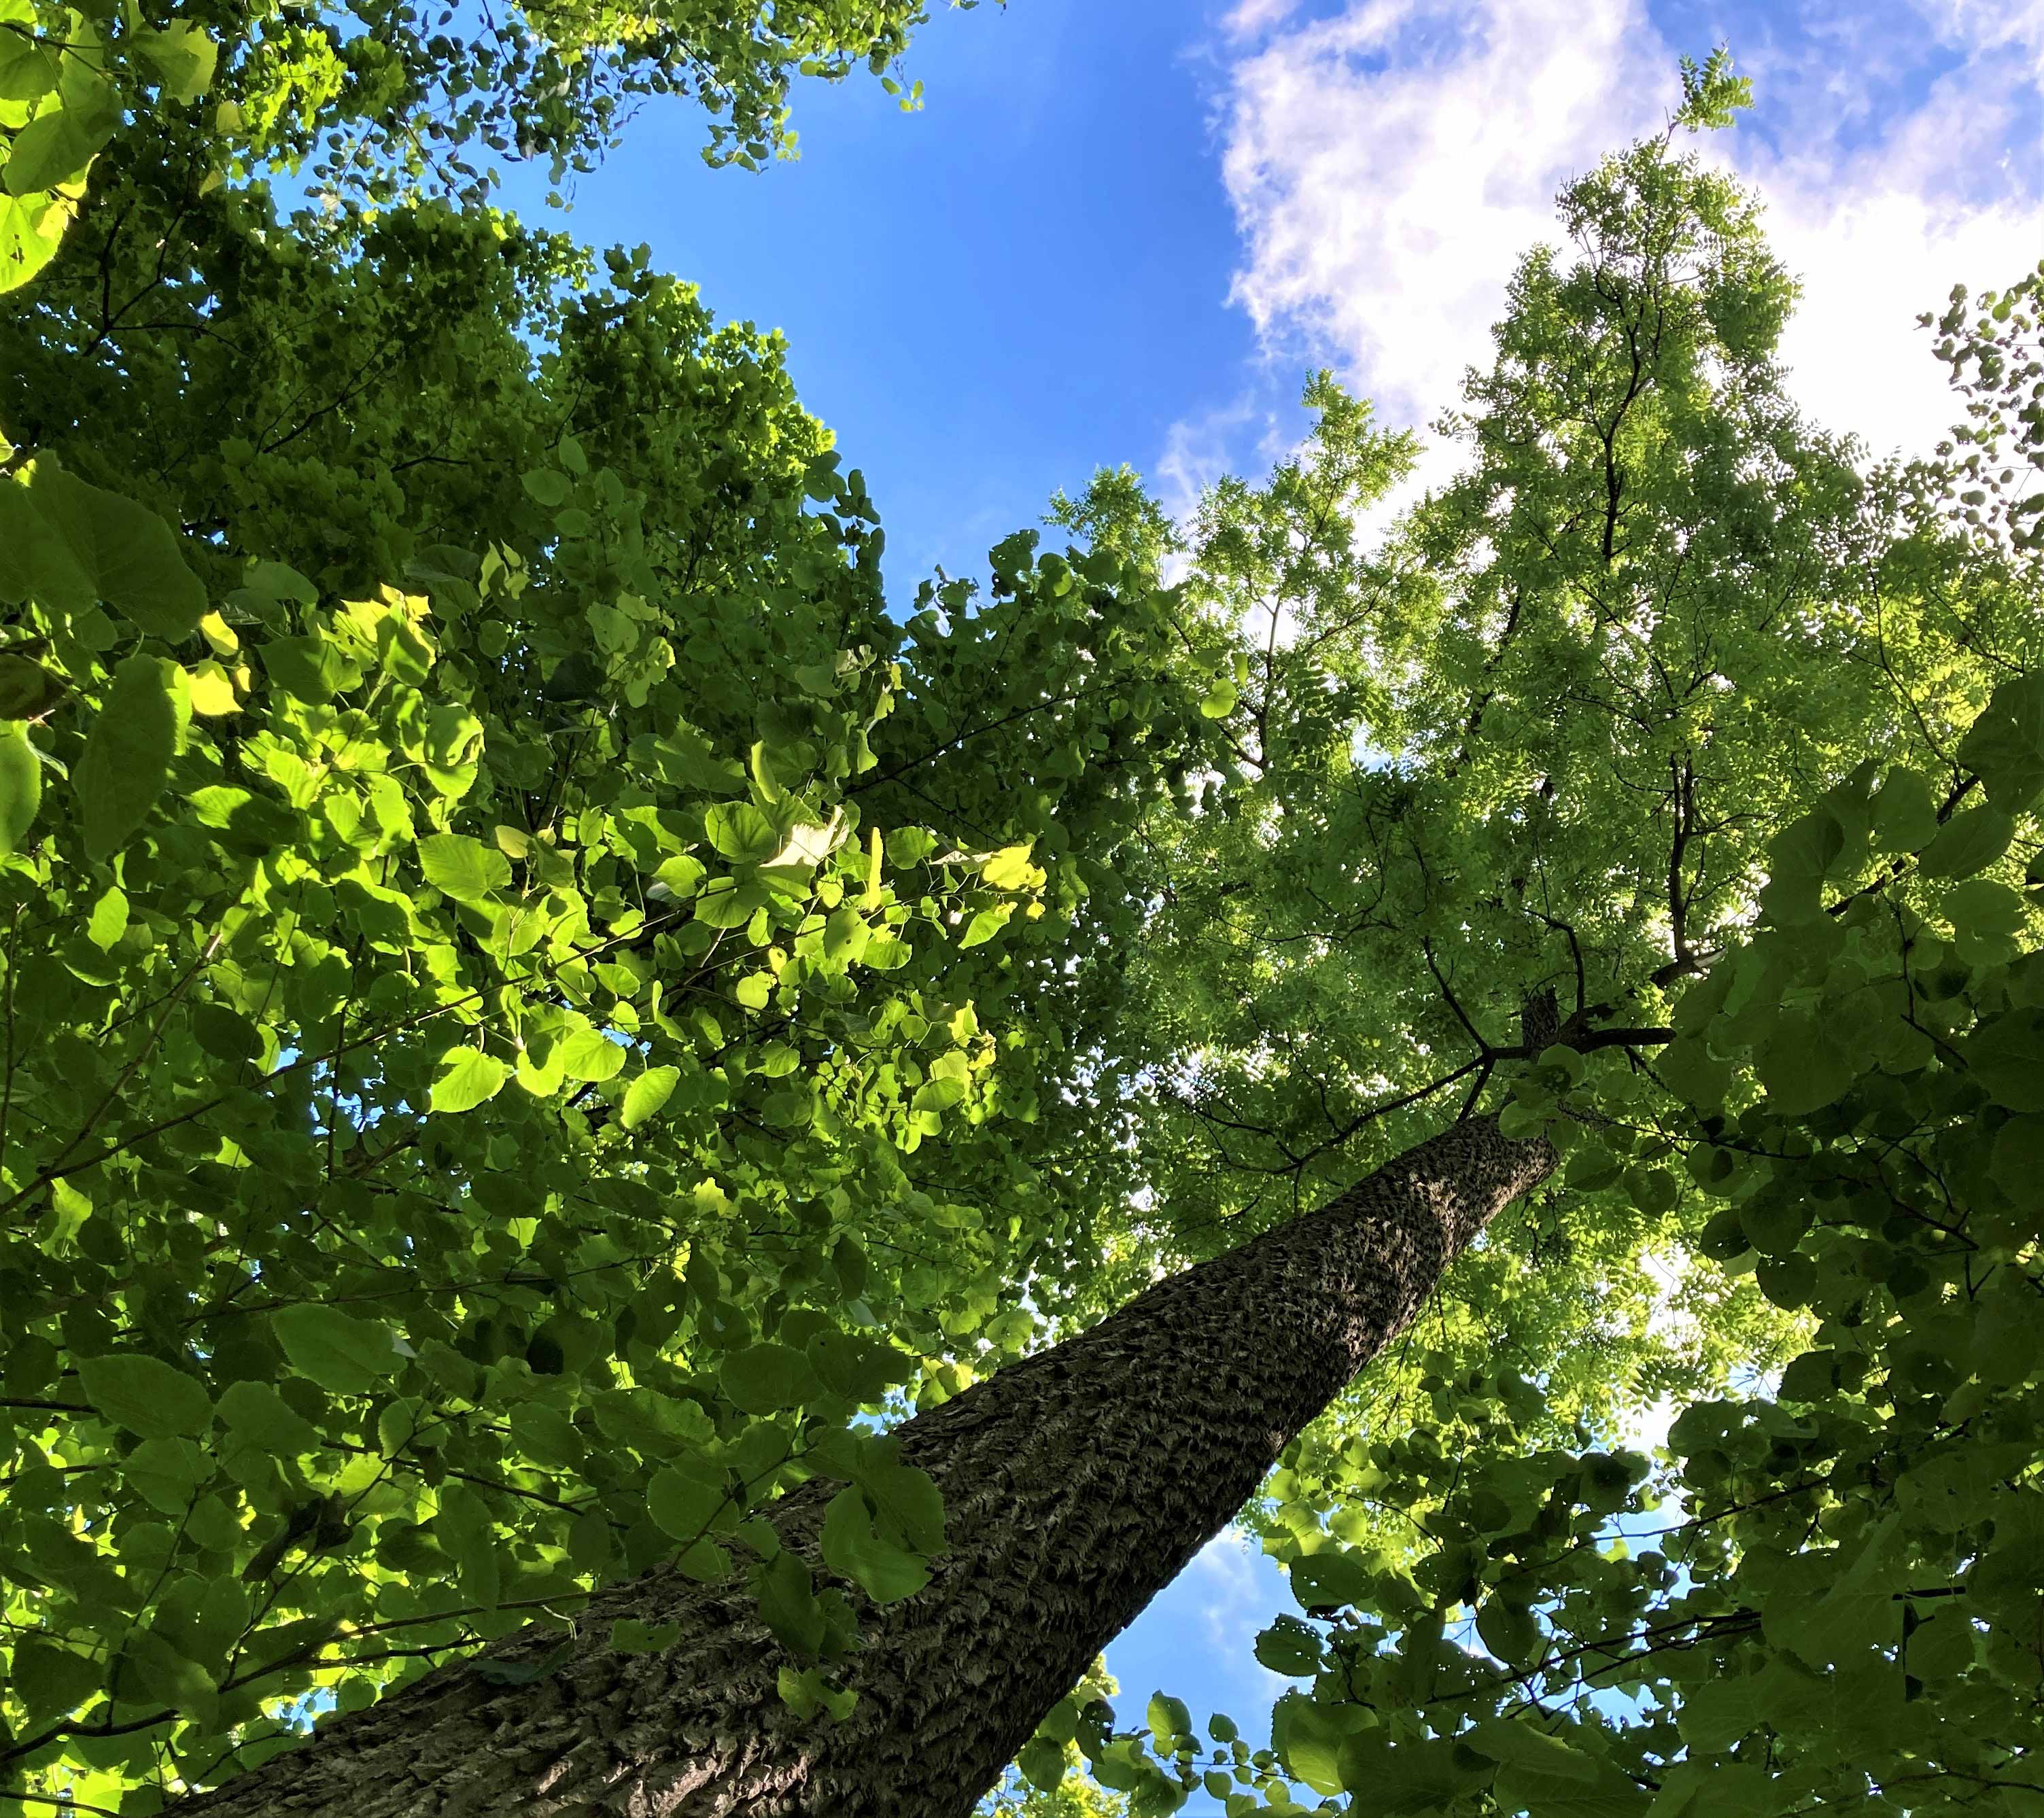 Looking up a tree at Messenger Woods.